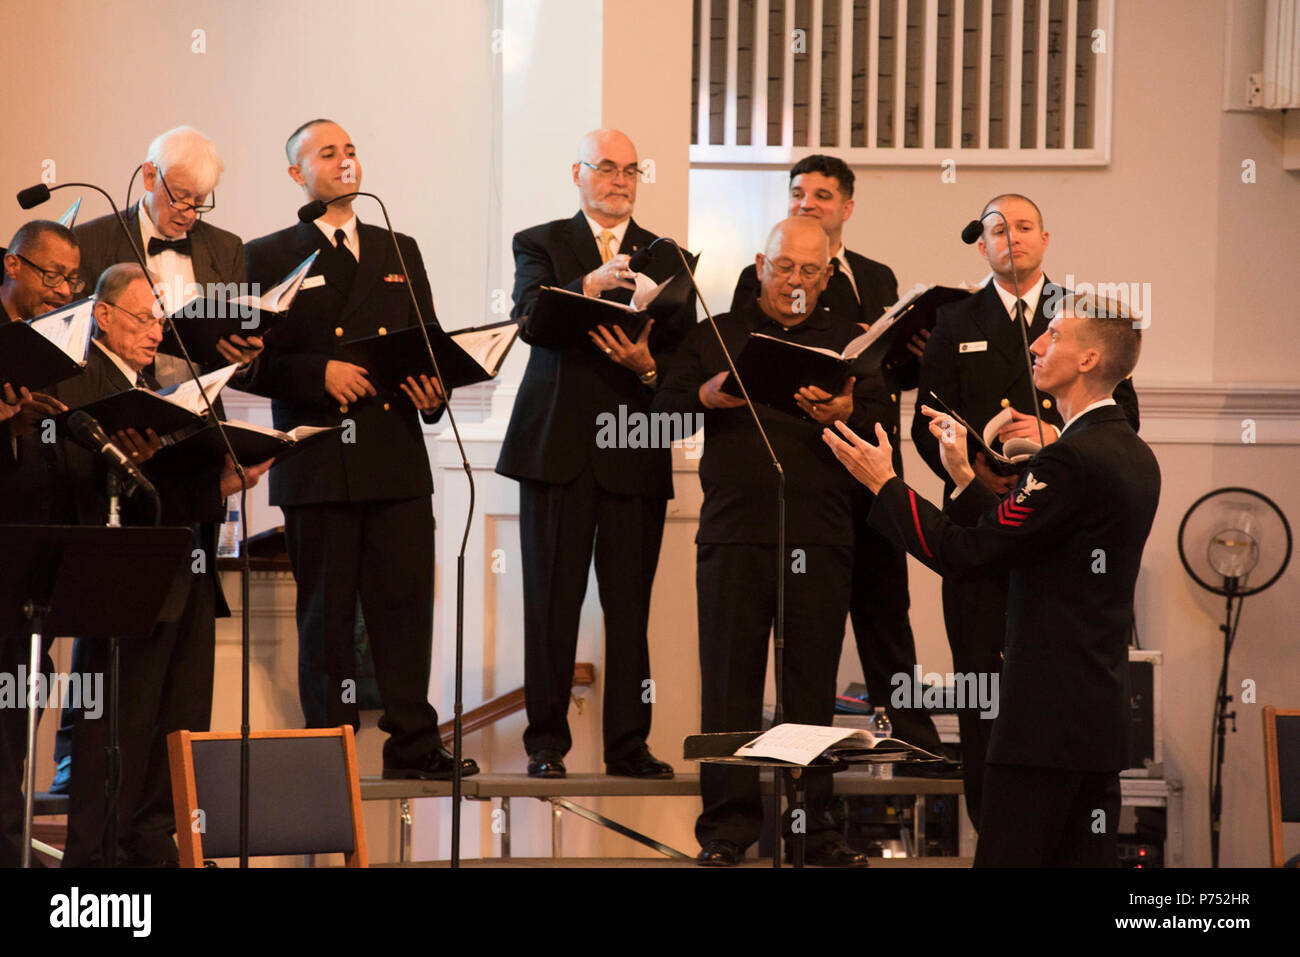 ANNANDALE, VIRGINIA  (October 30, 2016) Petty Officer 1st Class Adam Whitman, right, leads the men of the U.S. Navy Band Sea Chanters chorus during their 60th anniversary concert as they perform traditional sea chanteys. The Sea Chanters celebrated their 60th anniversary iin Annandale, Virginia, with a concert featuring alumni from the group. The chorus was formed as an all-male group in 1956 and tasked with perpetuating the songs of the sea. In 1980, the group added women to their ranks and expanded their repertoire to include everything from Brahms to Broadway. Stock Photo